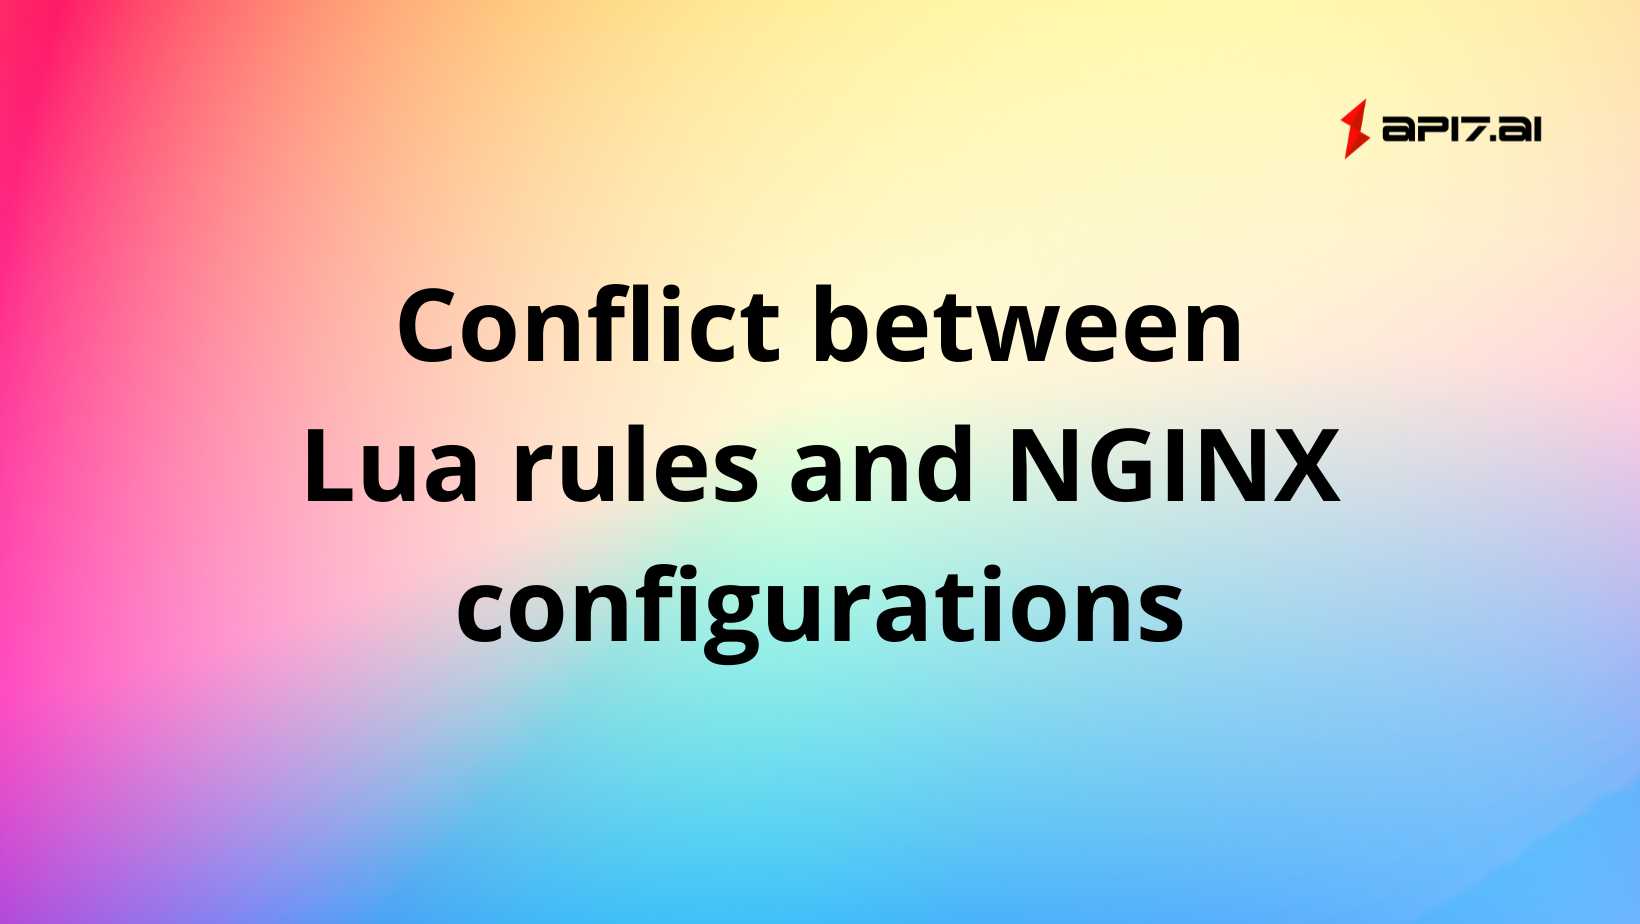 What if there is a conflict between Lua rules and NGINX configuration?